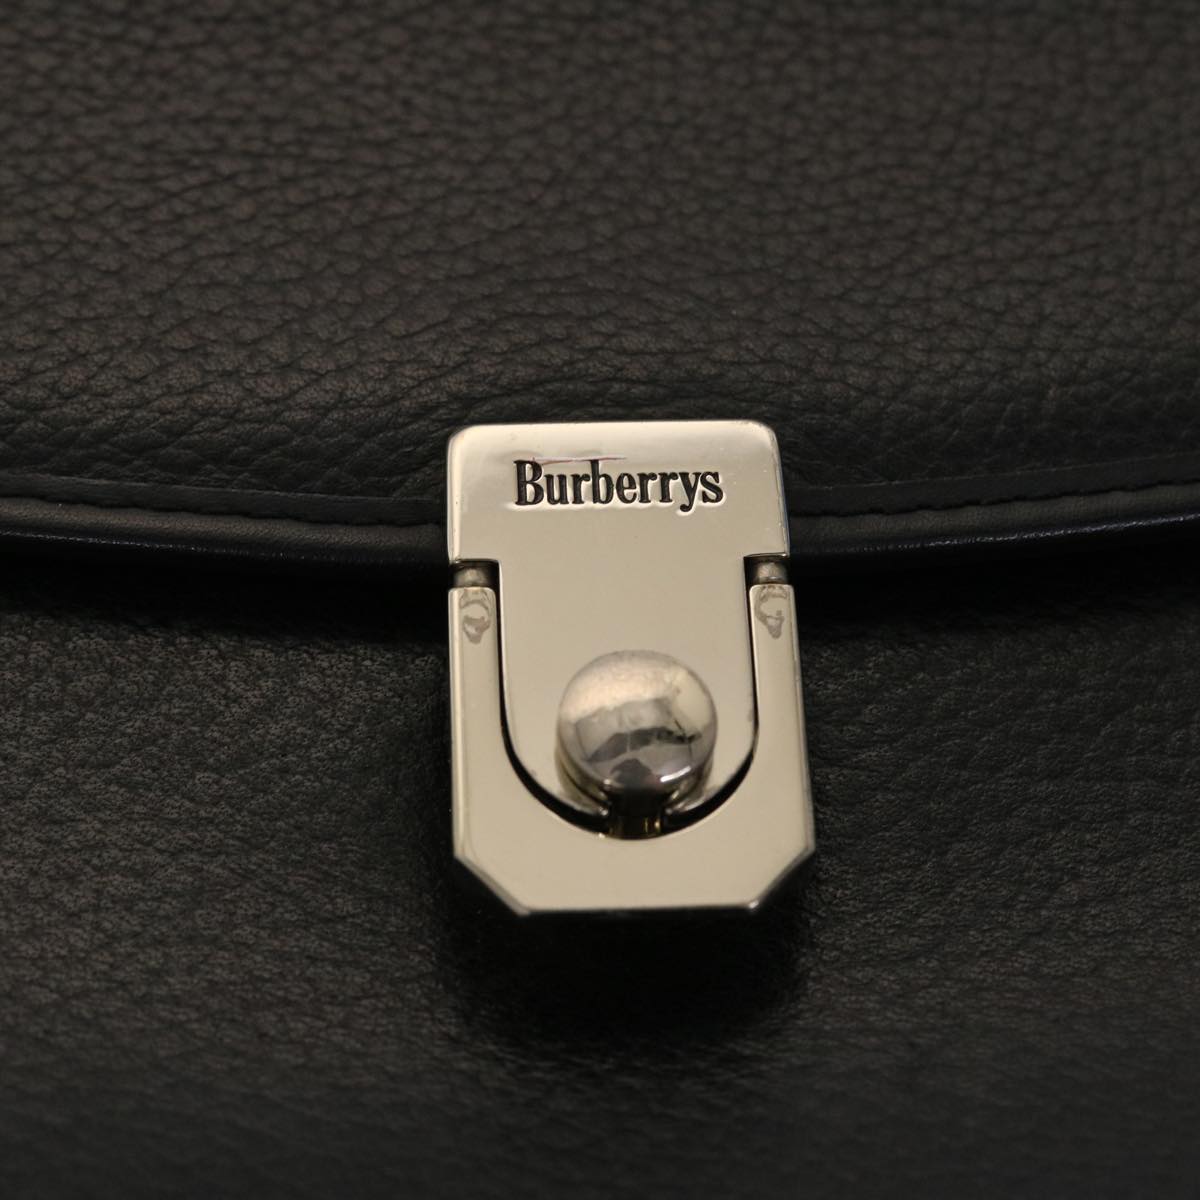 Burberrys Hand Bag Leather Black Auth 48107